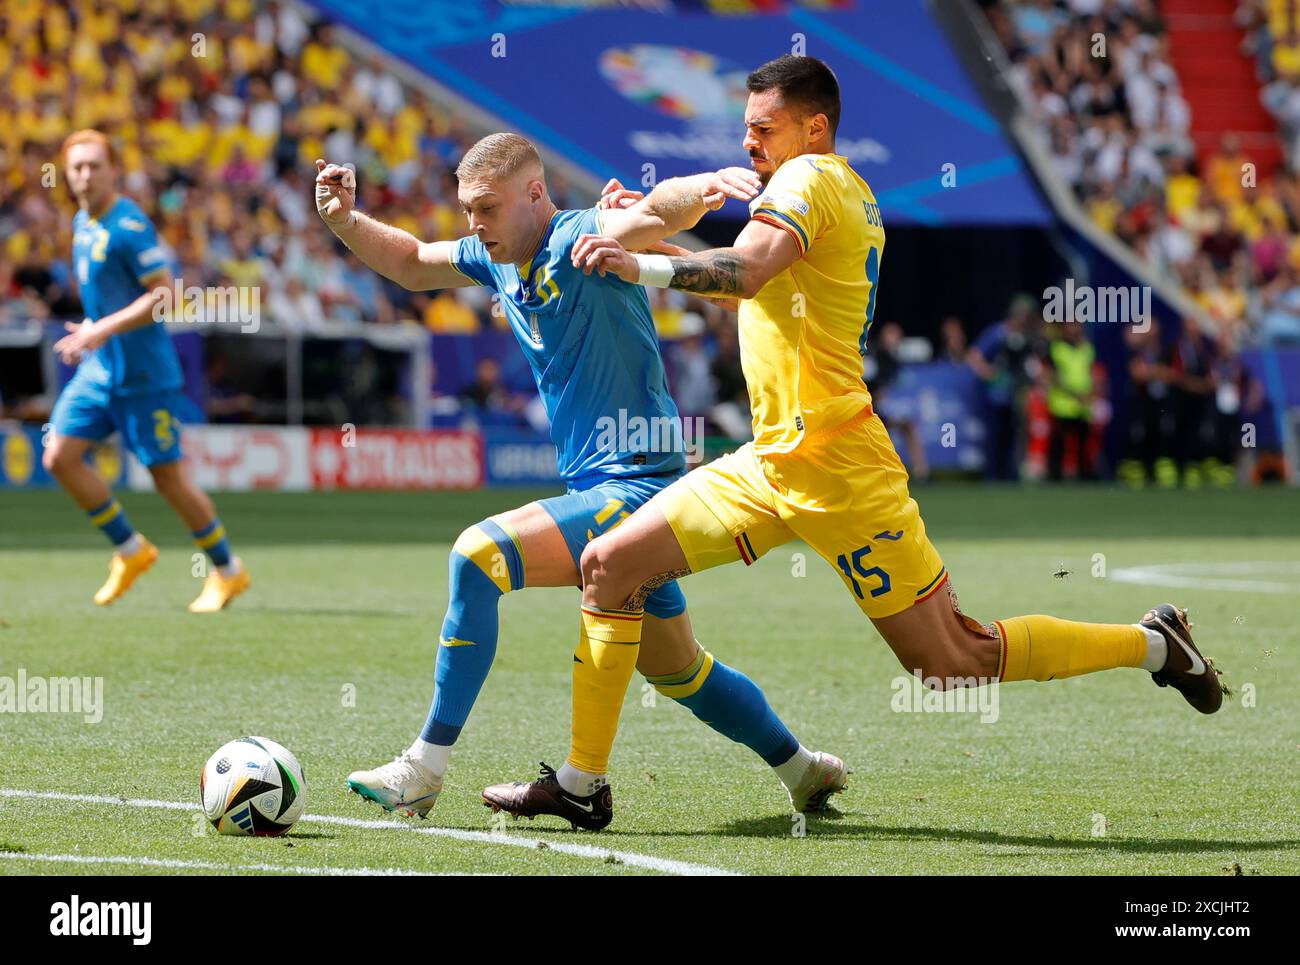 Munich, Germany. 17th June, 2024. Andrei Burca (R) of Romania competes against Artem Dovbyk of Ukraine during the UEFA Euro 2024 Group E match between Romania and Ukraine in Munich, Germany, on June 17, 2024. Credit: Philippe Ruiz/Xinhua/Alamy Live News Stock Photo